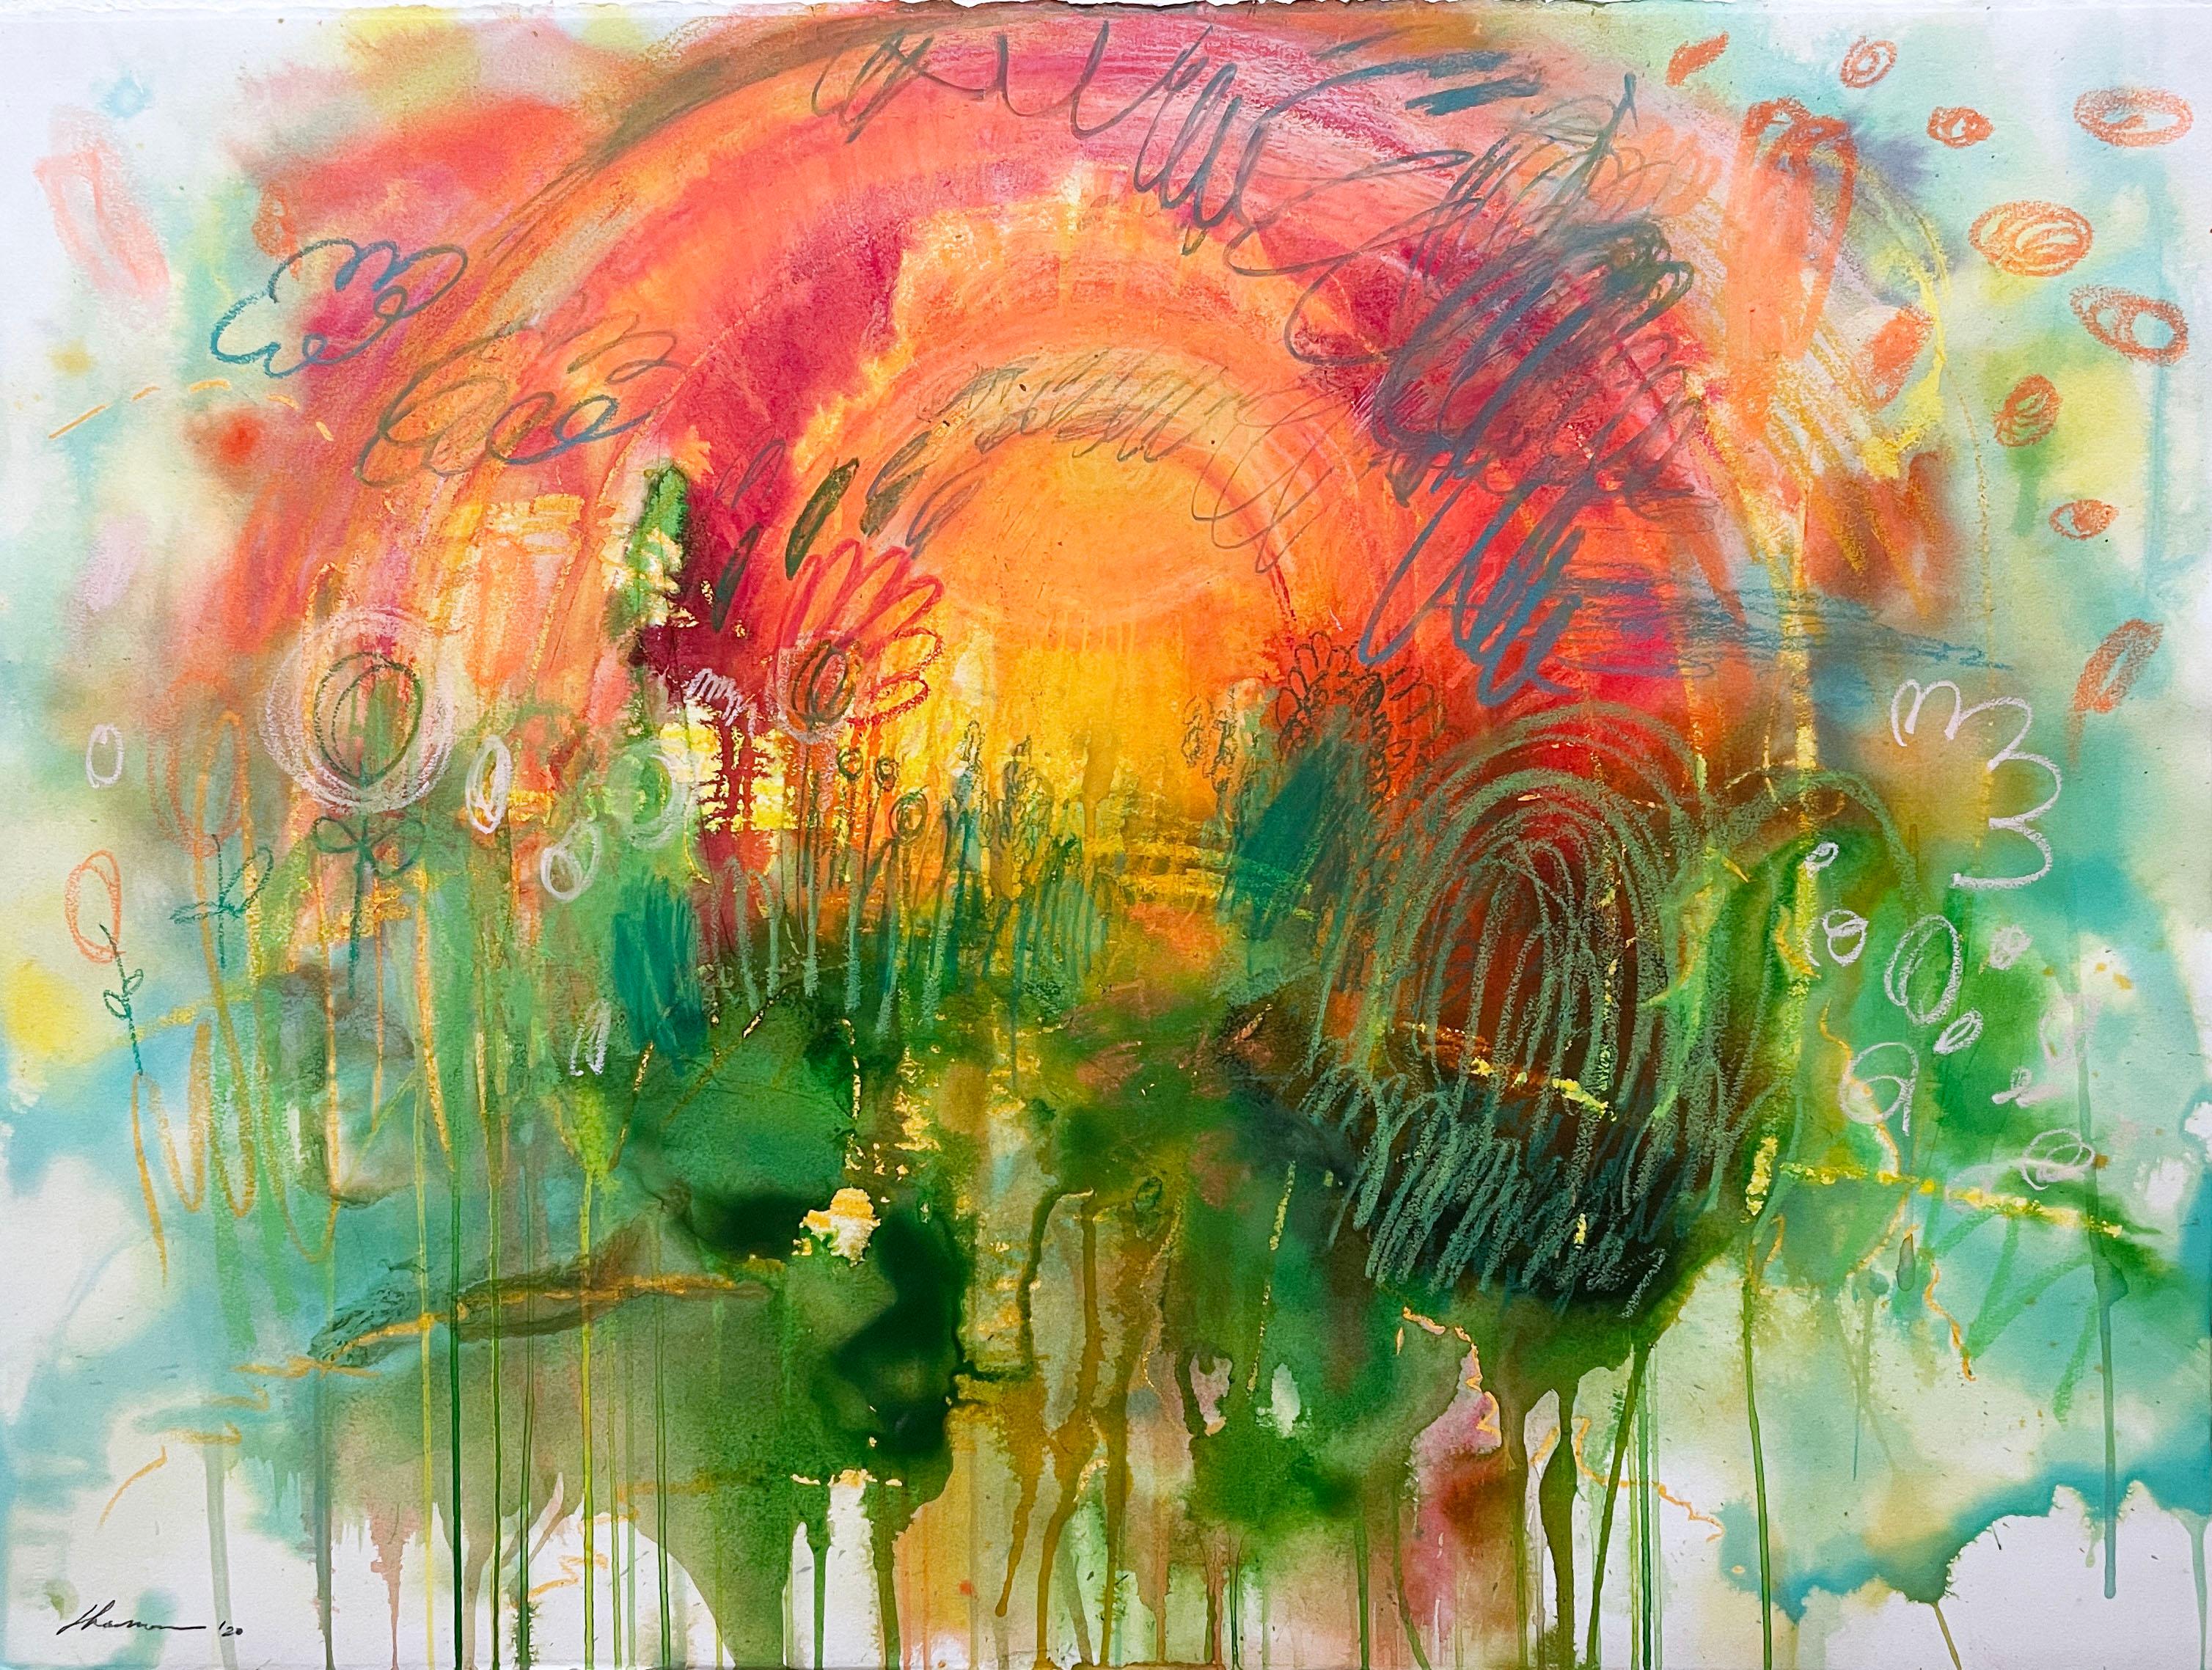 Warm & Golden (2020), surreal abstract dream-like landscape, garden, rainbow - Beige Abstract Drawing by Shamona Stokes